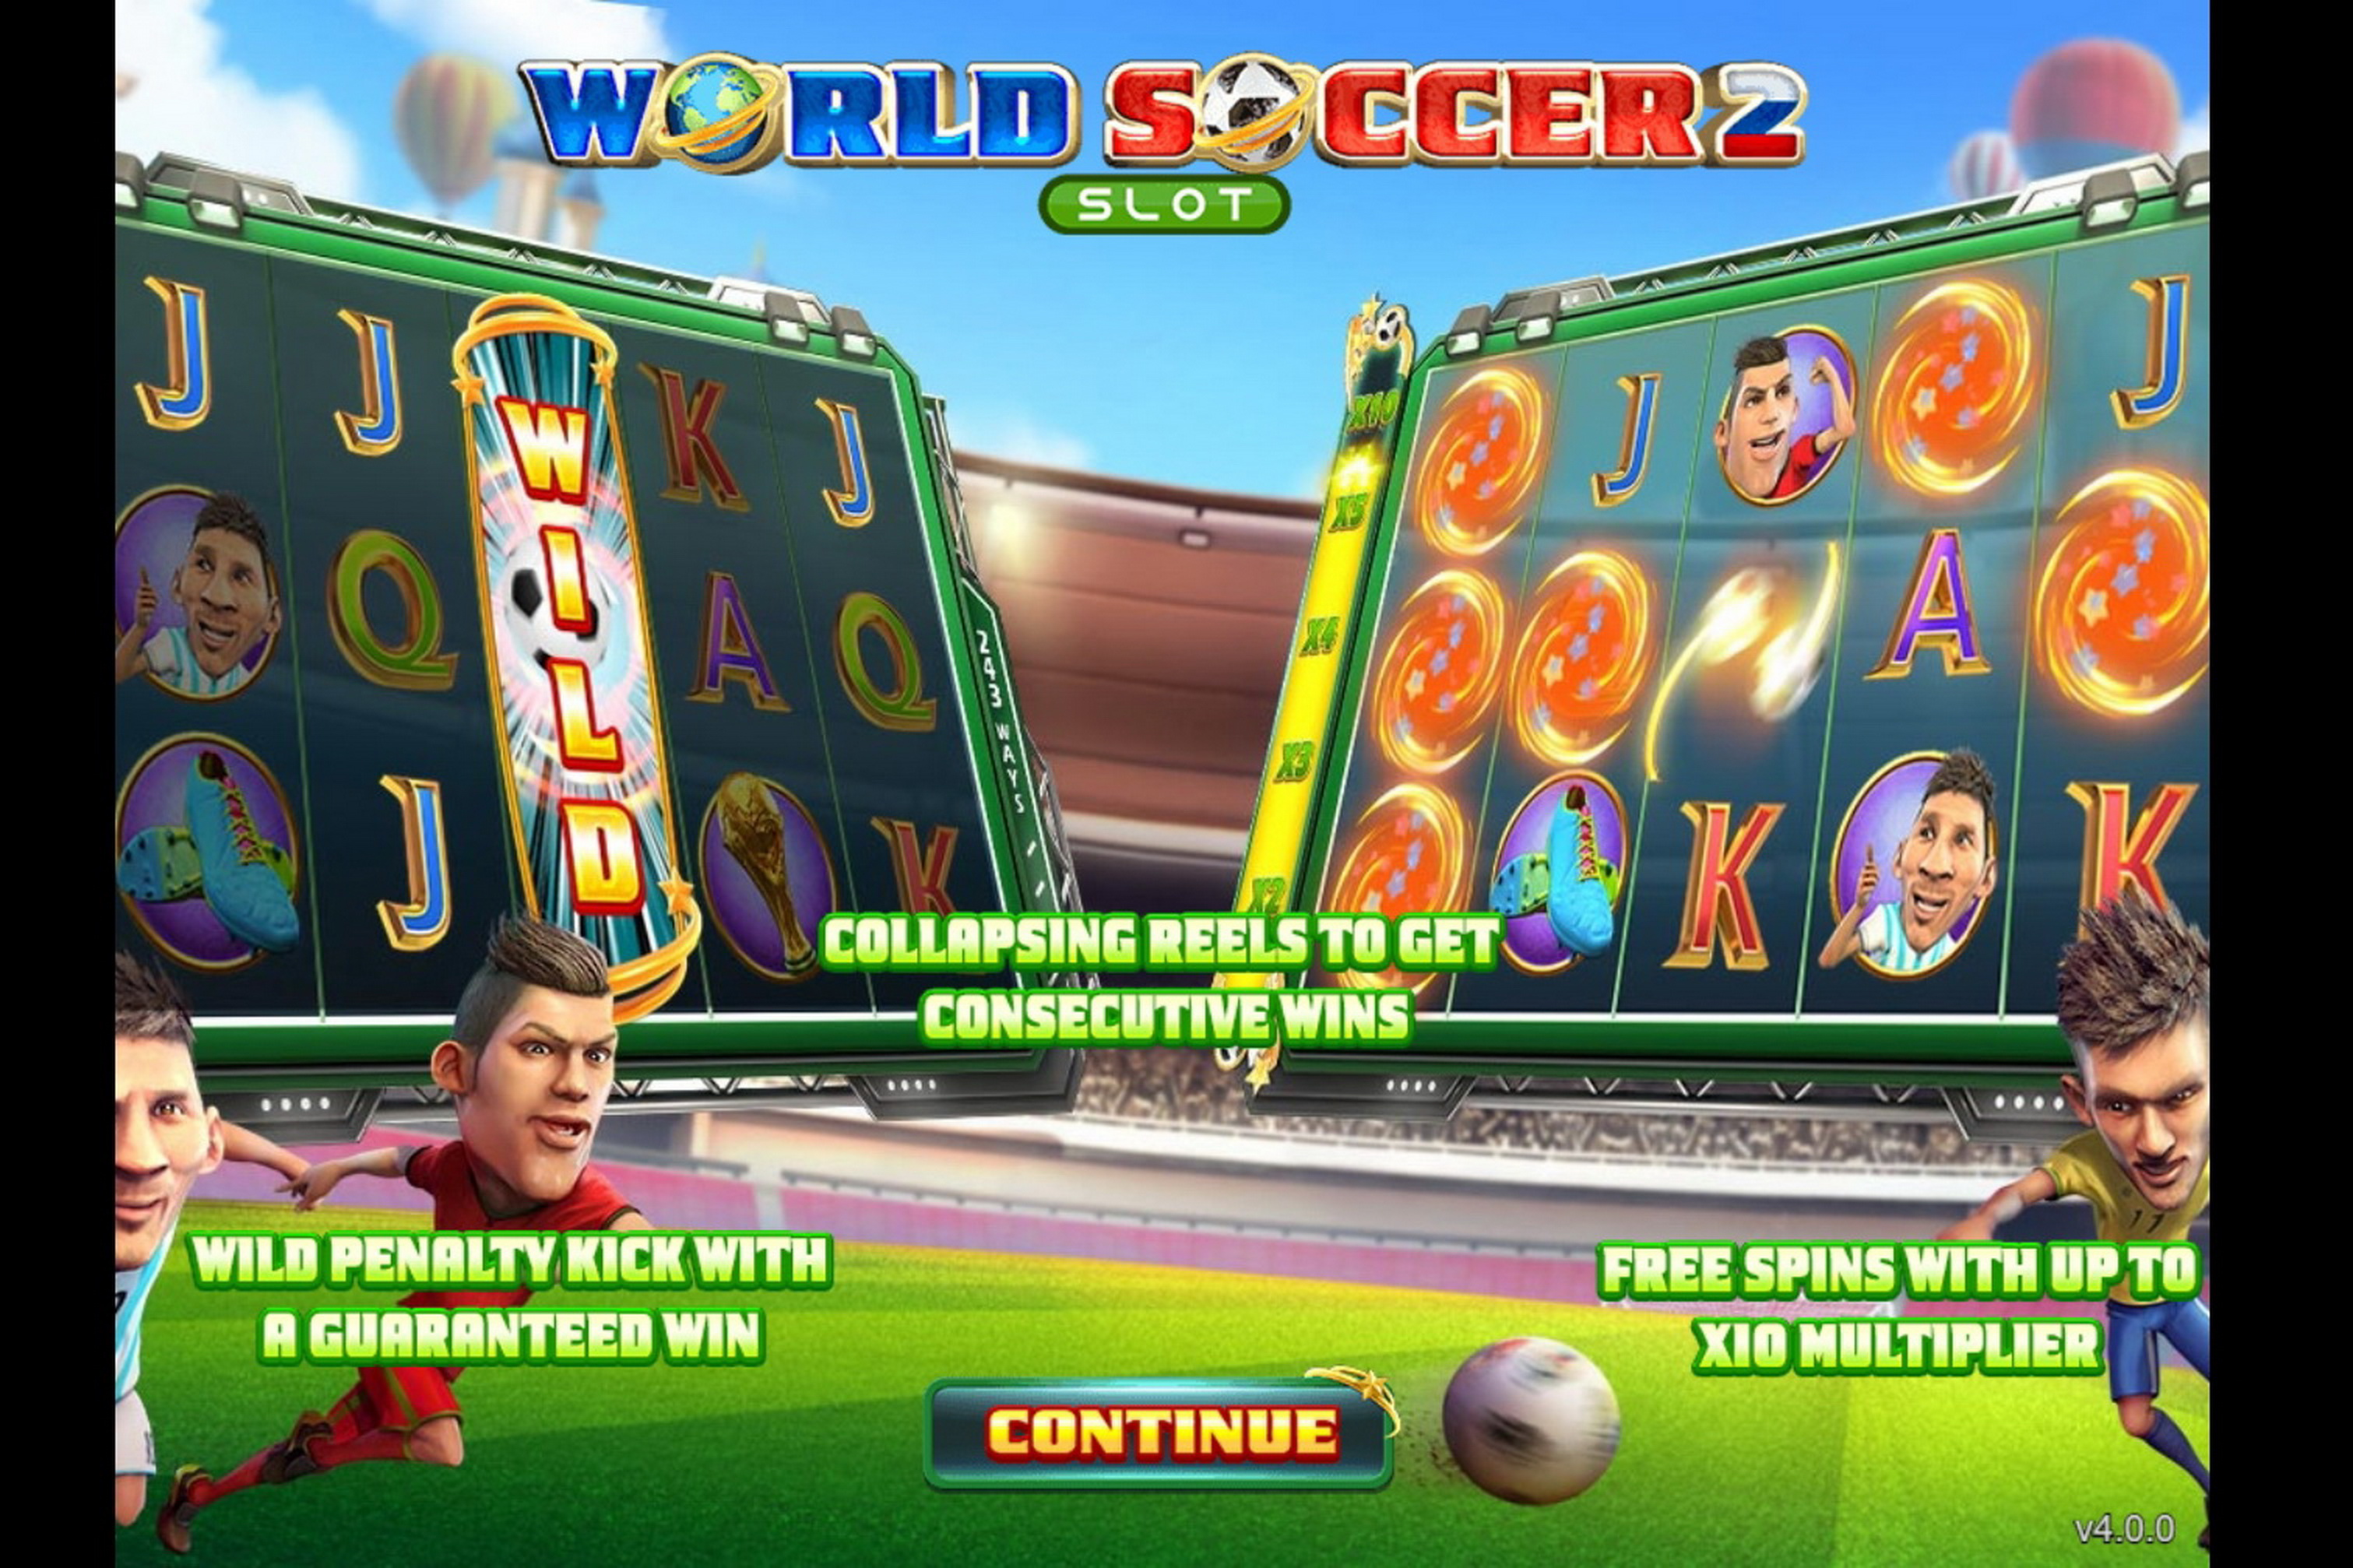 Play World Soccer Slot 2 Free Casino Slot Game by Gameplay Interactive